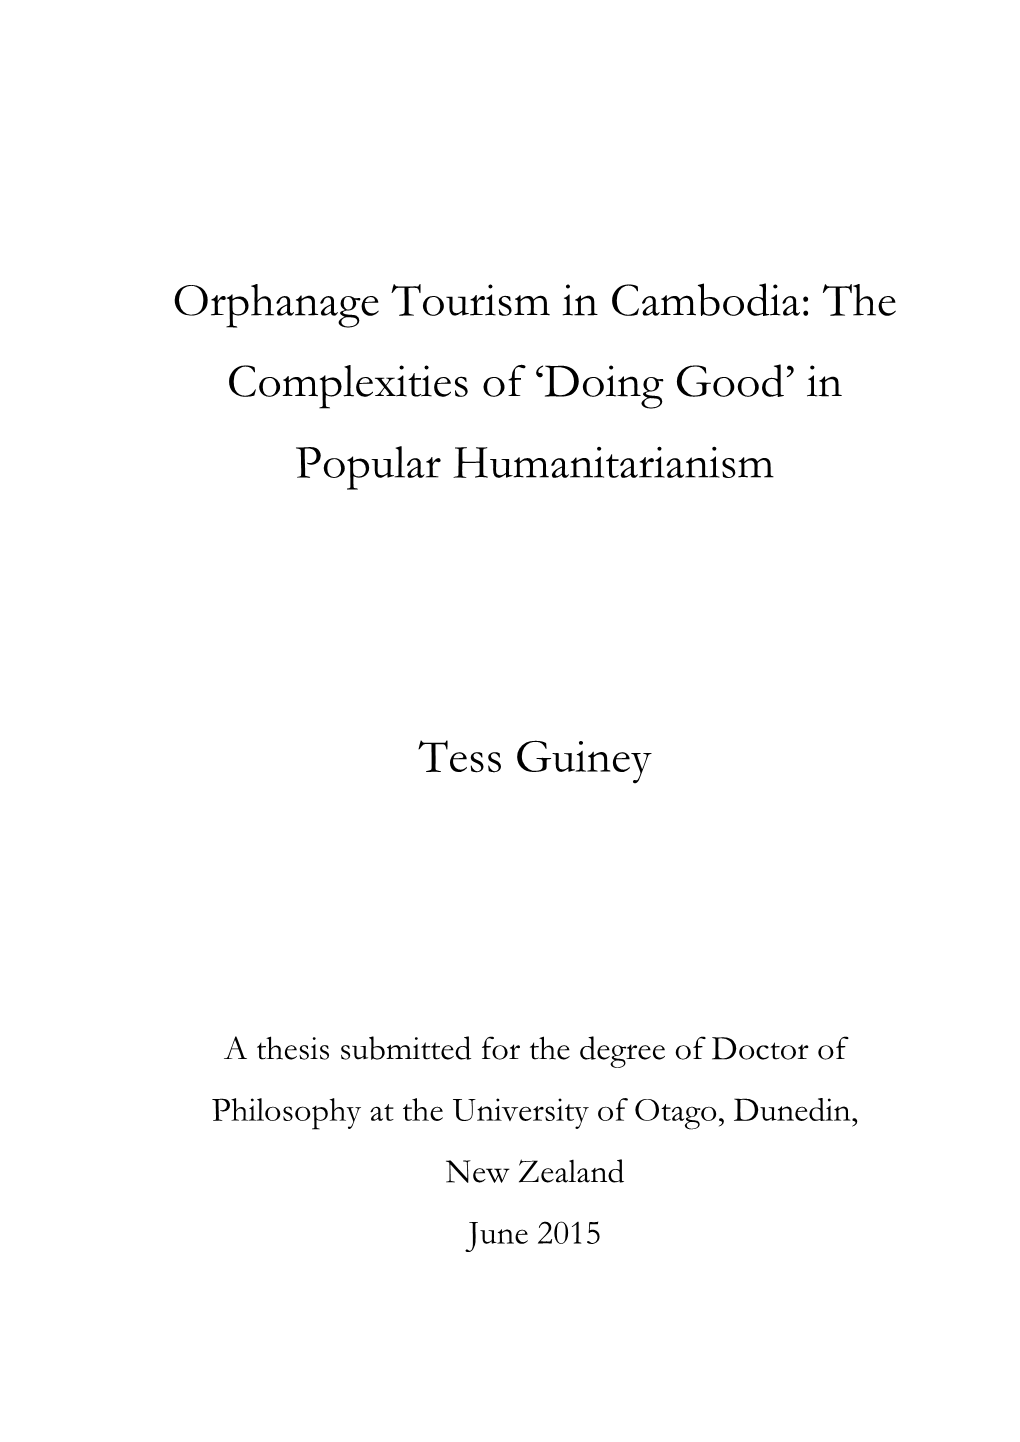 Orphanage Tourism in Cambodia: the Complexities of ‗Doing Good‘ in Popular Humanitarianism